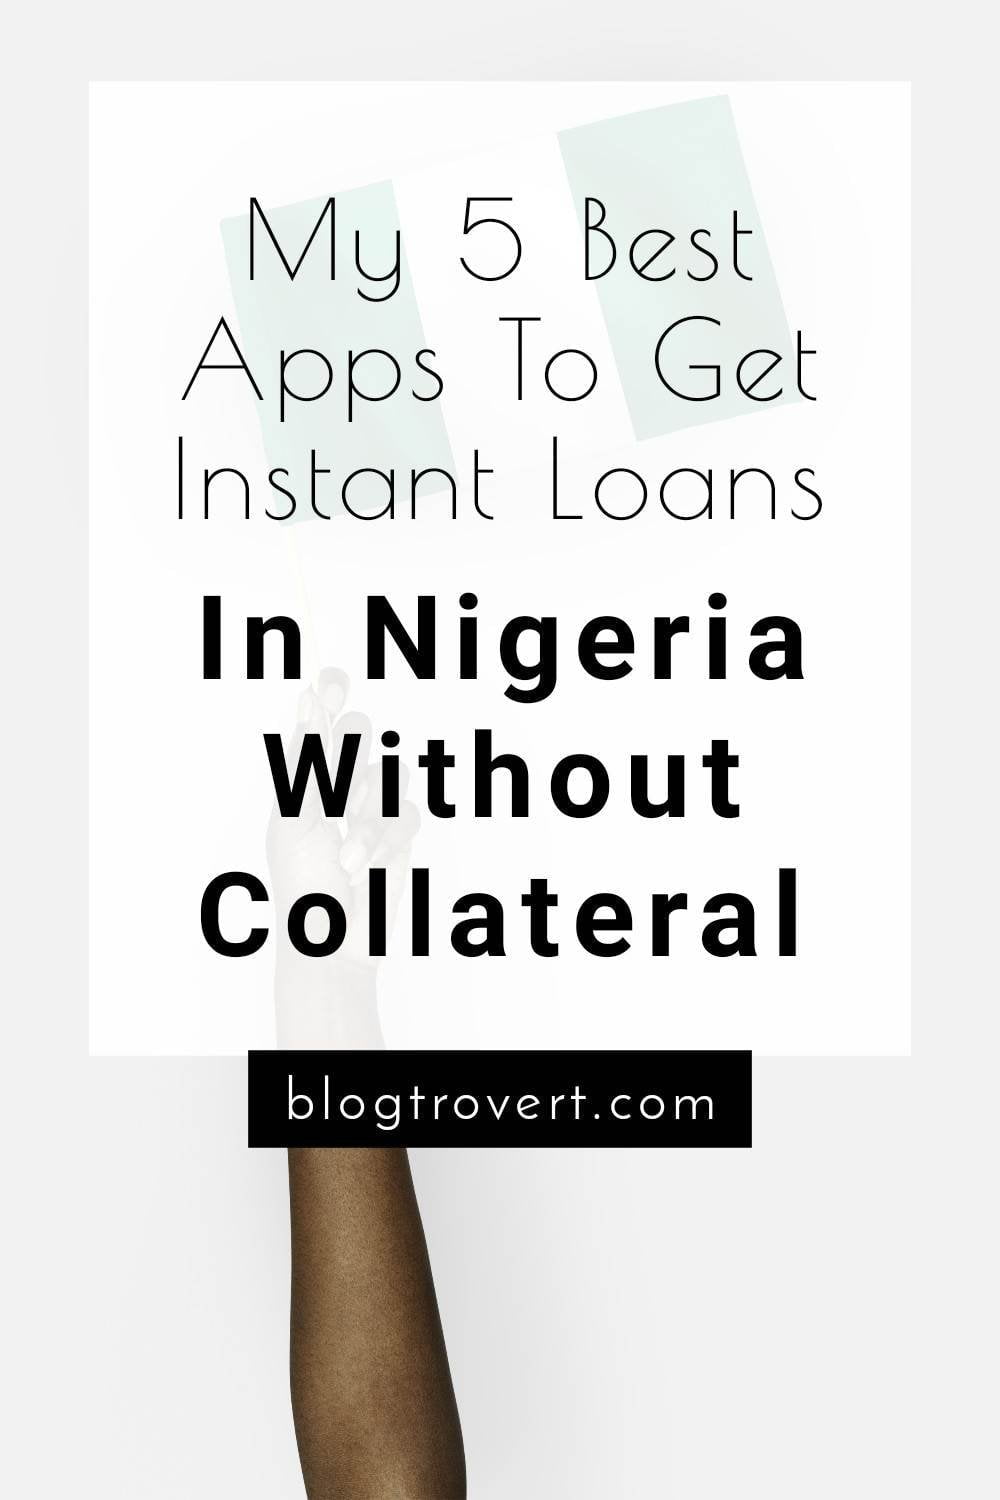 6 Top Loan Apps In Nigeria That Offer Low Interest Rates 6